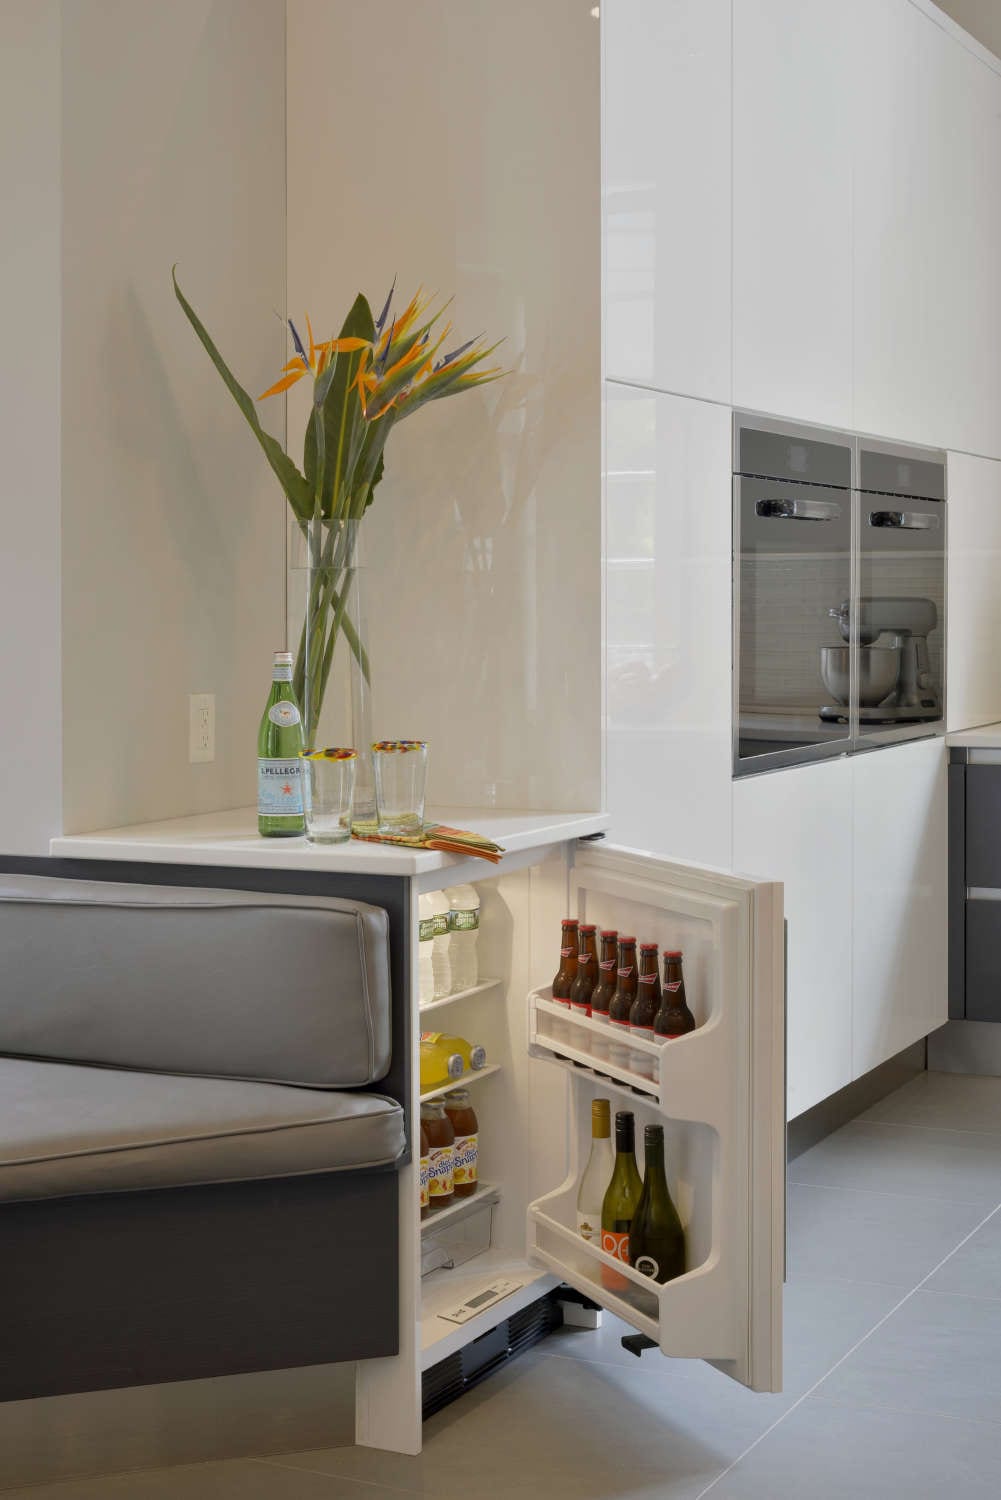 Beverage fridge is built into a kitchen and banquette design and topped with white marble counter.